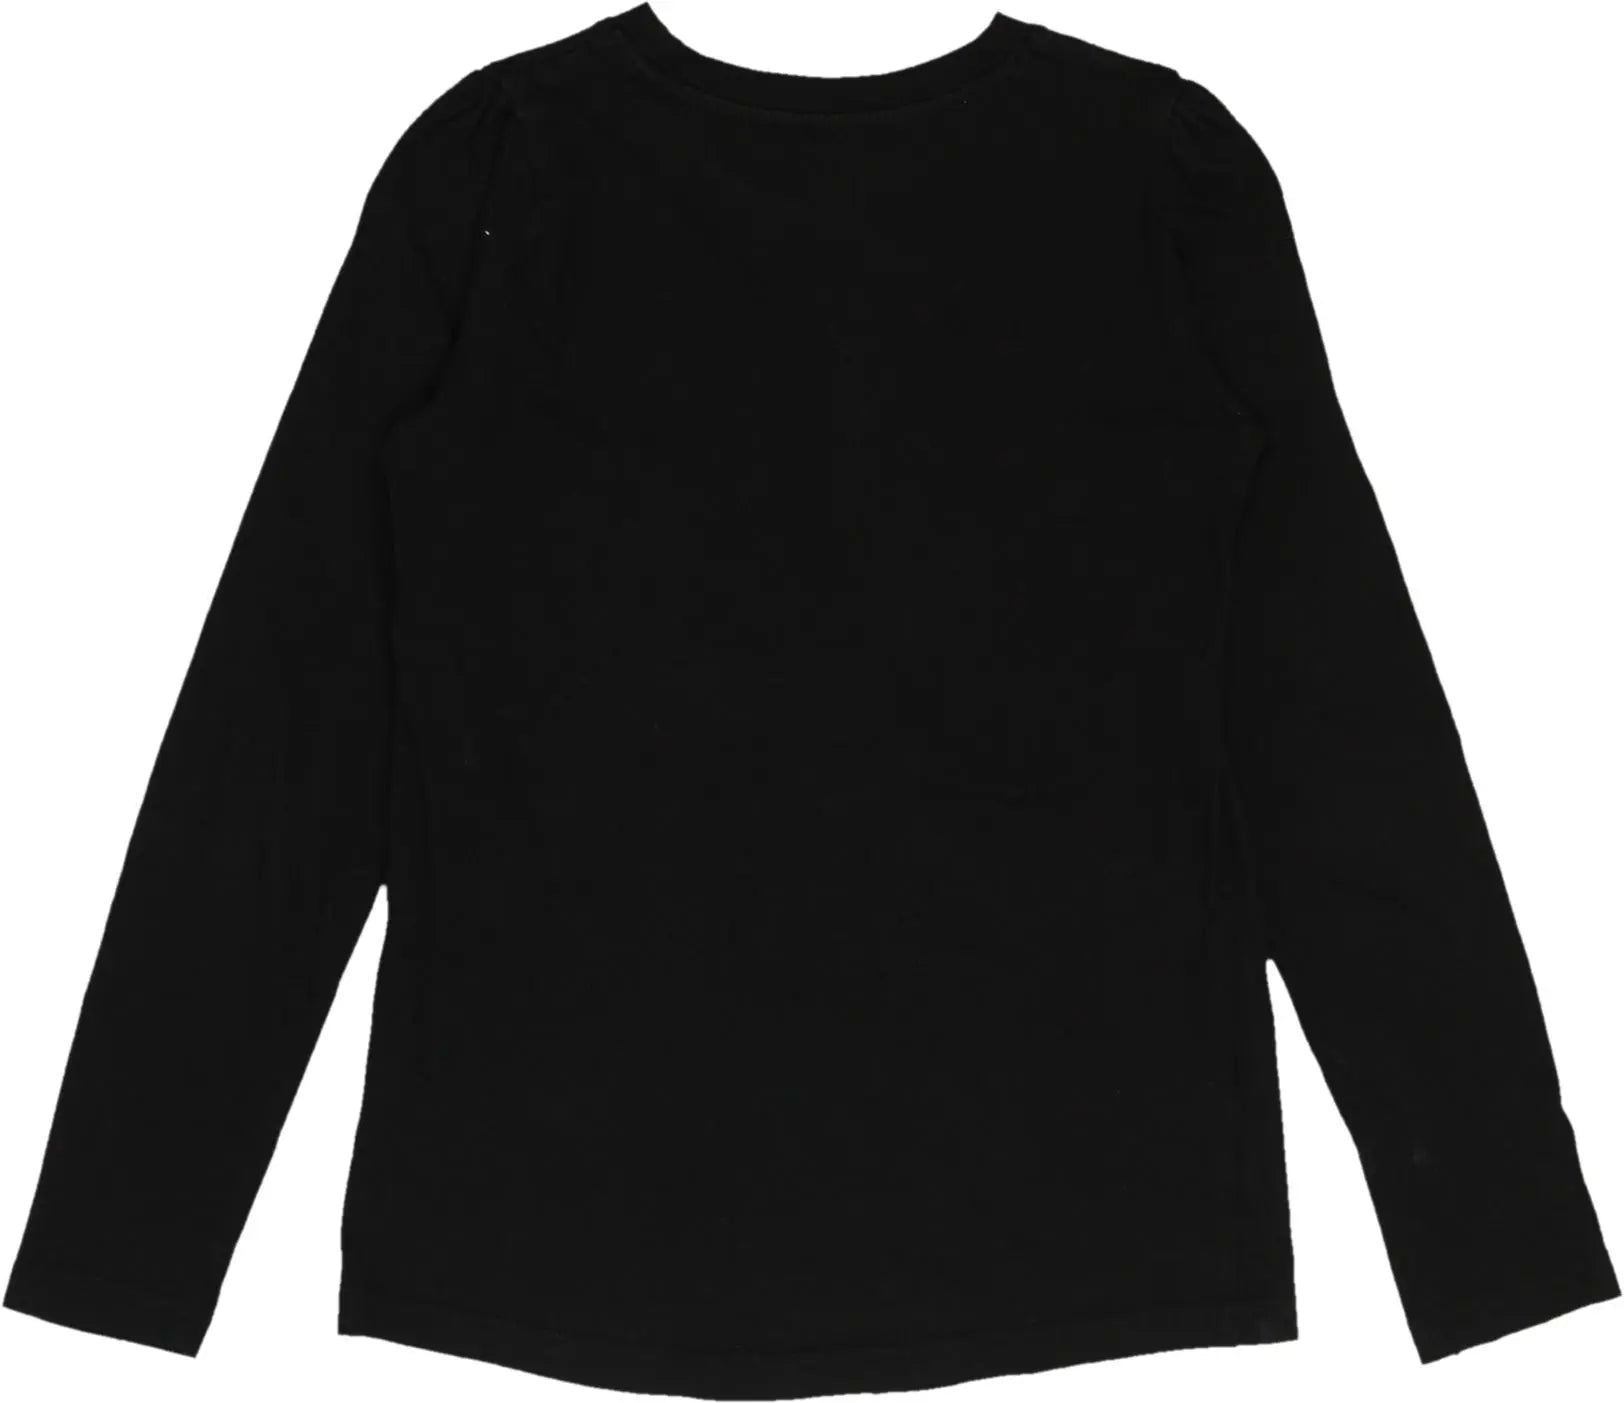 Europe Kids - Black Long Sleeve Shirt- ThriftTale.com - Vintage and second handclothing